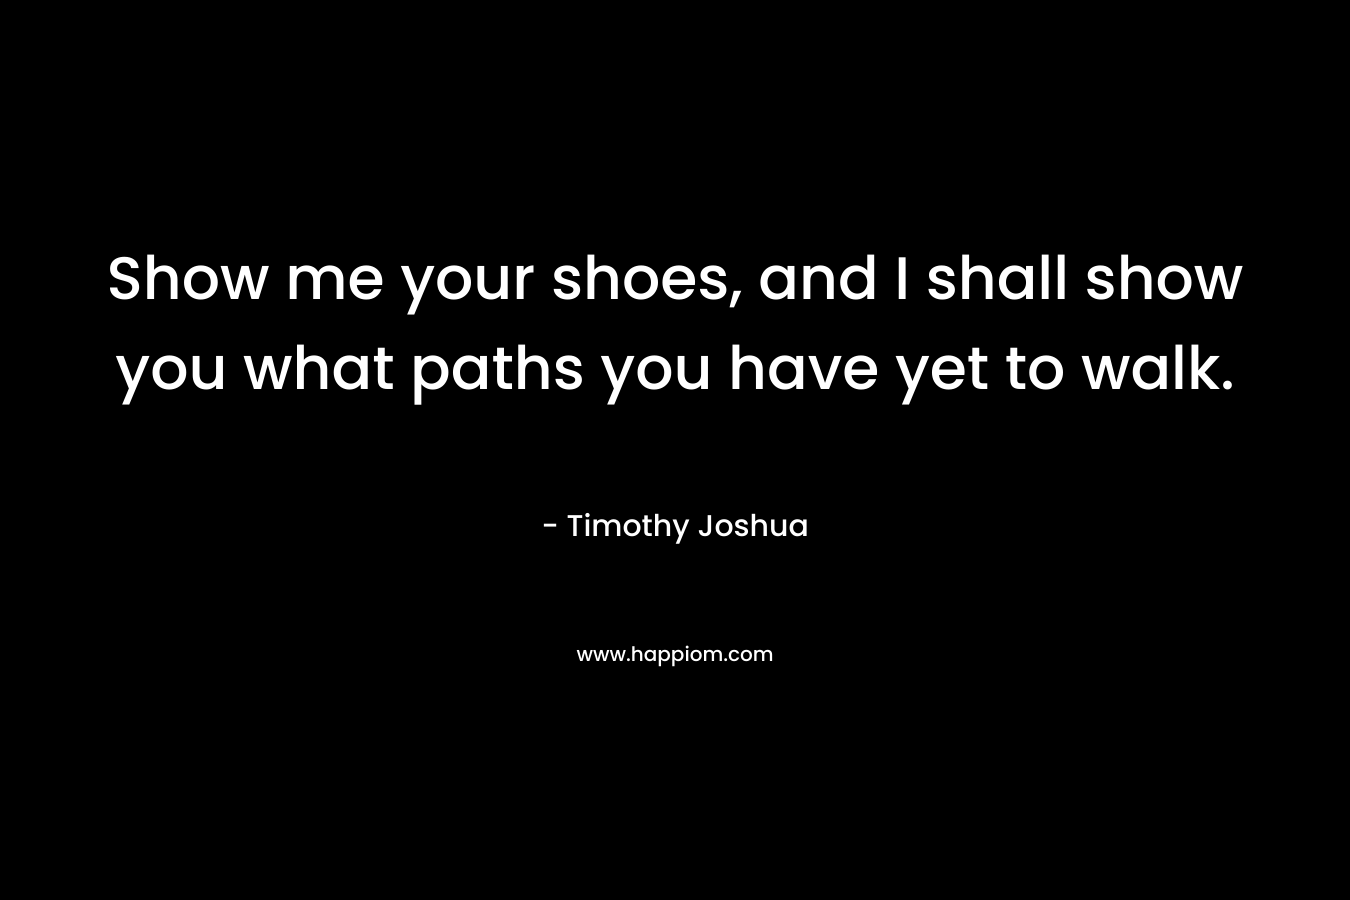 Show me your shoes, and I shall show you what paths you have yet to walk.